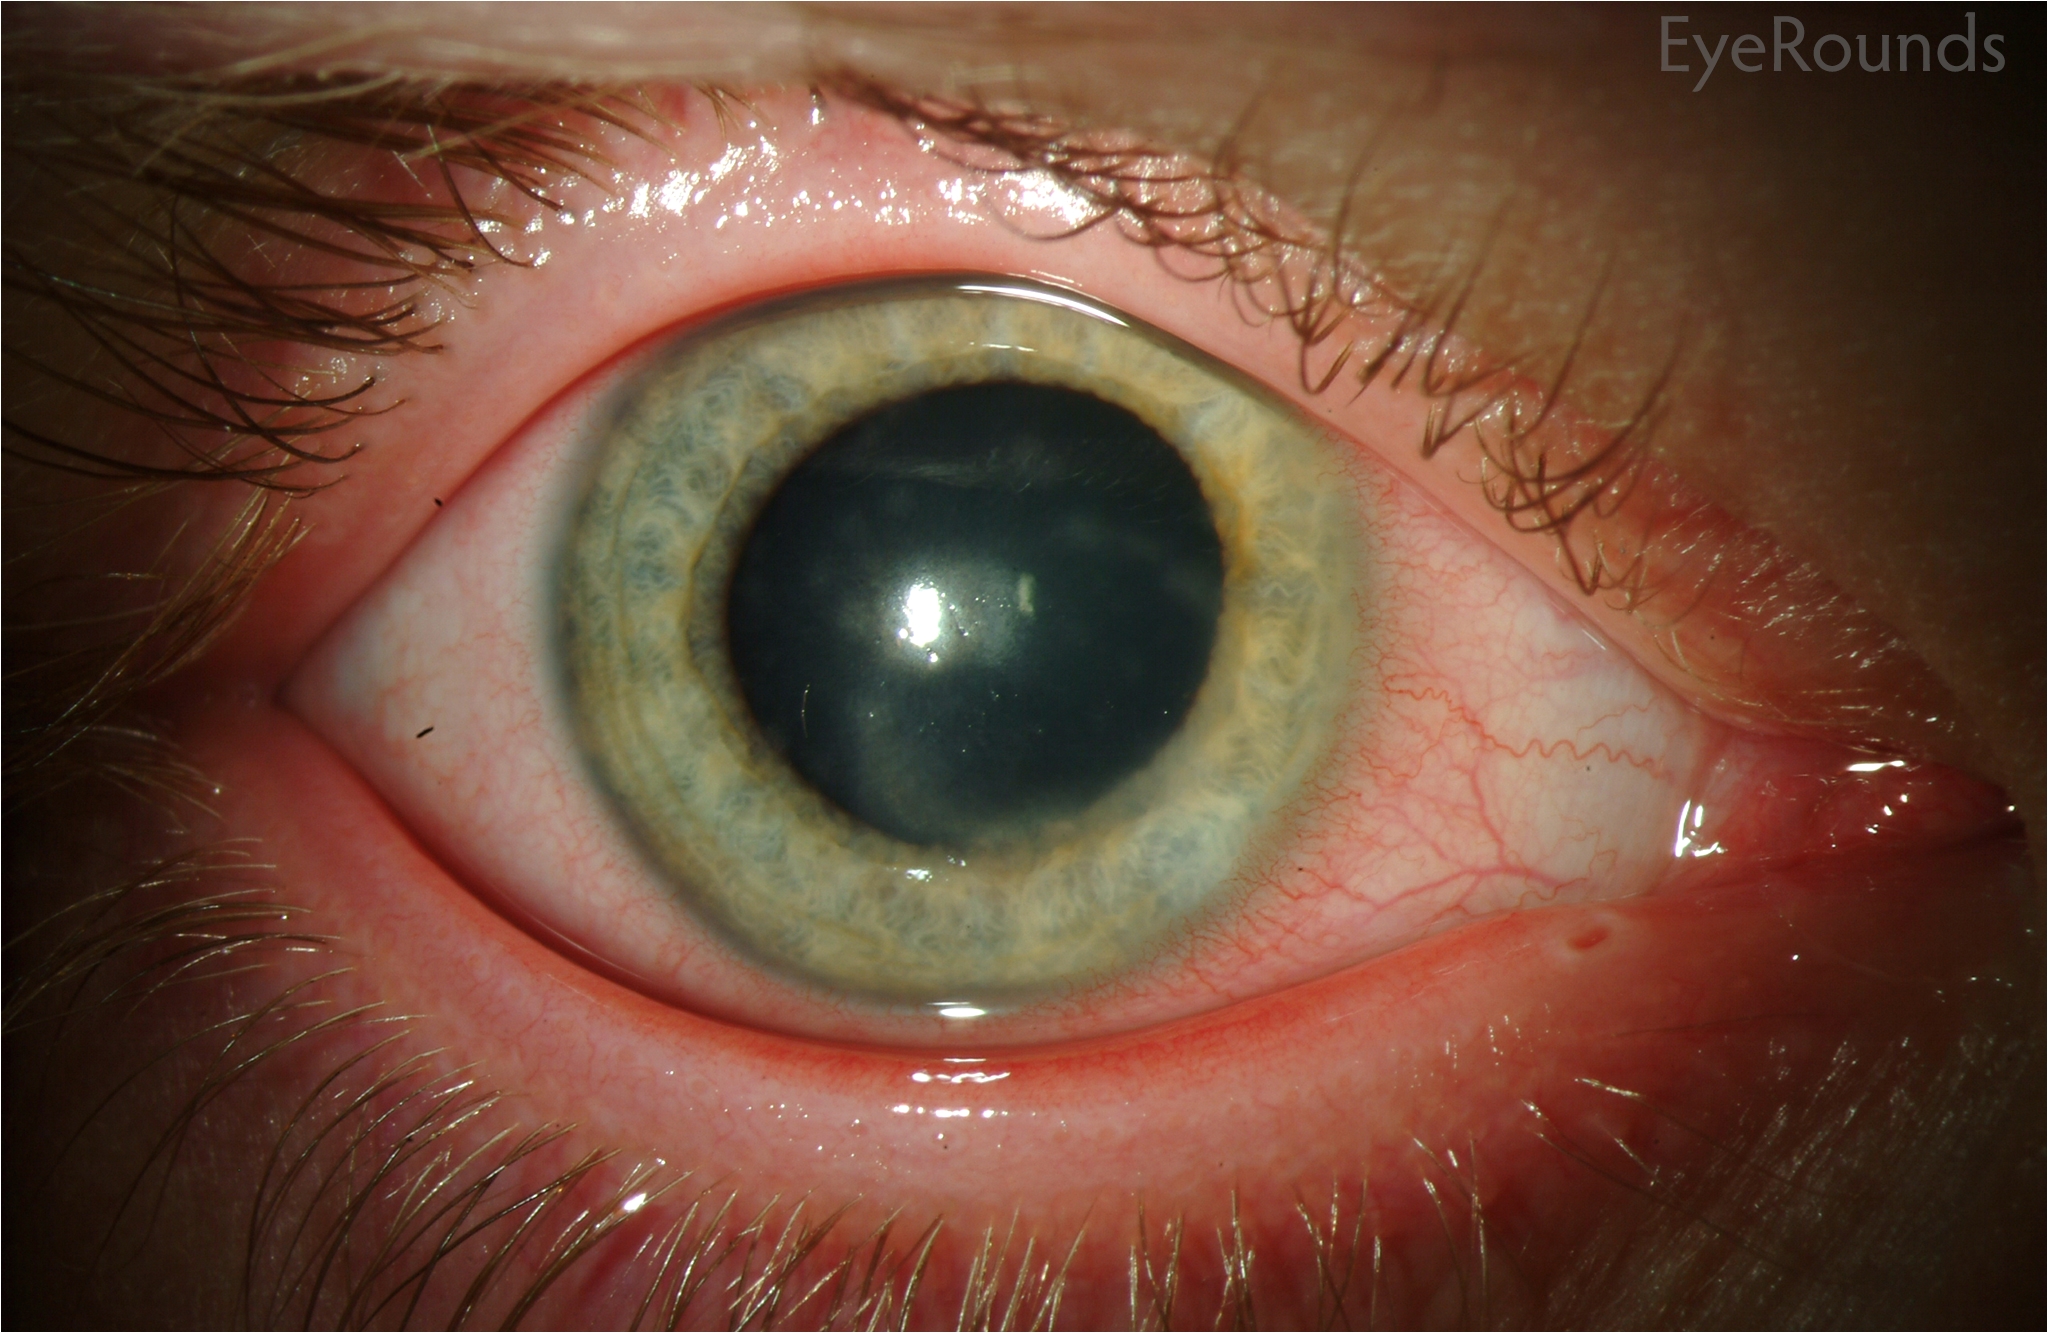 classic immune stromal keratitis with mid deep stromal infiltration and intact epithelium